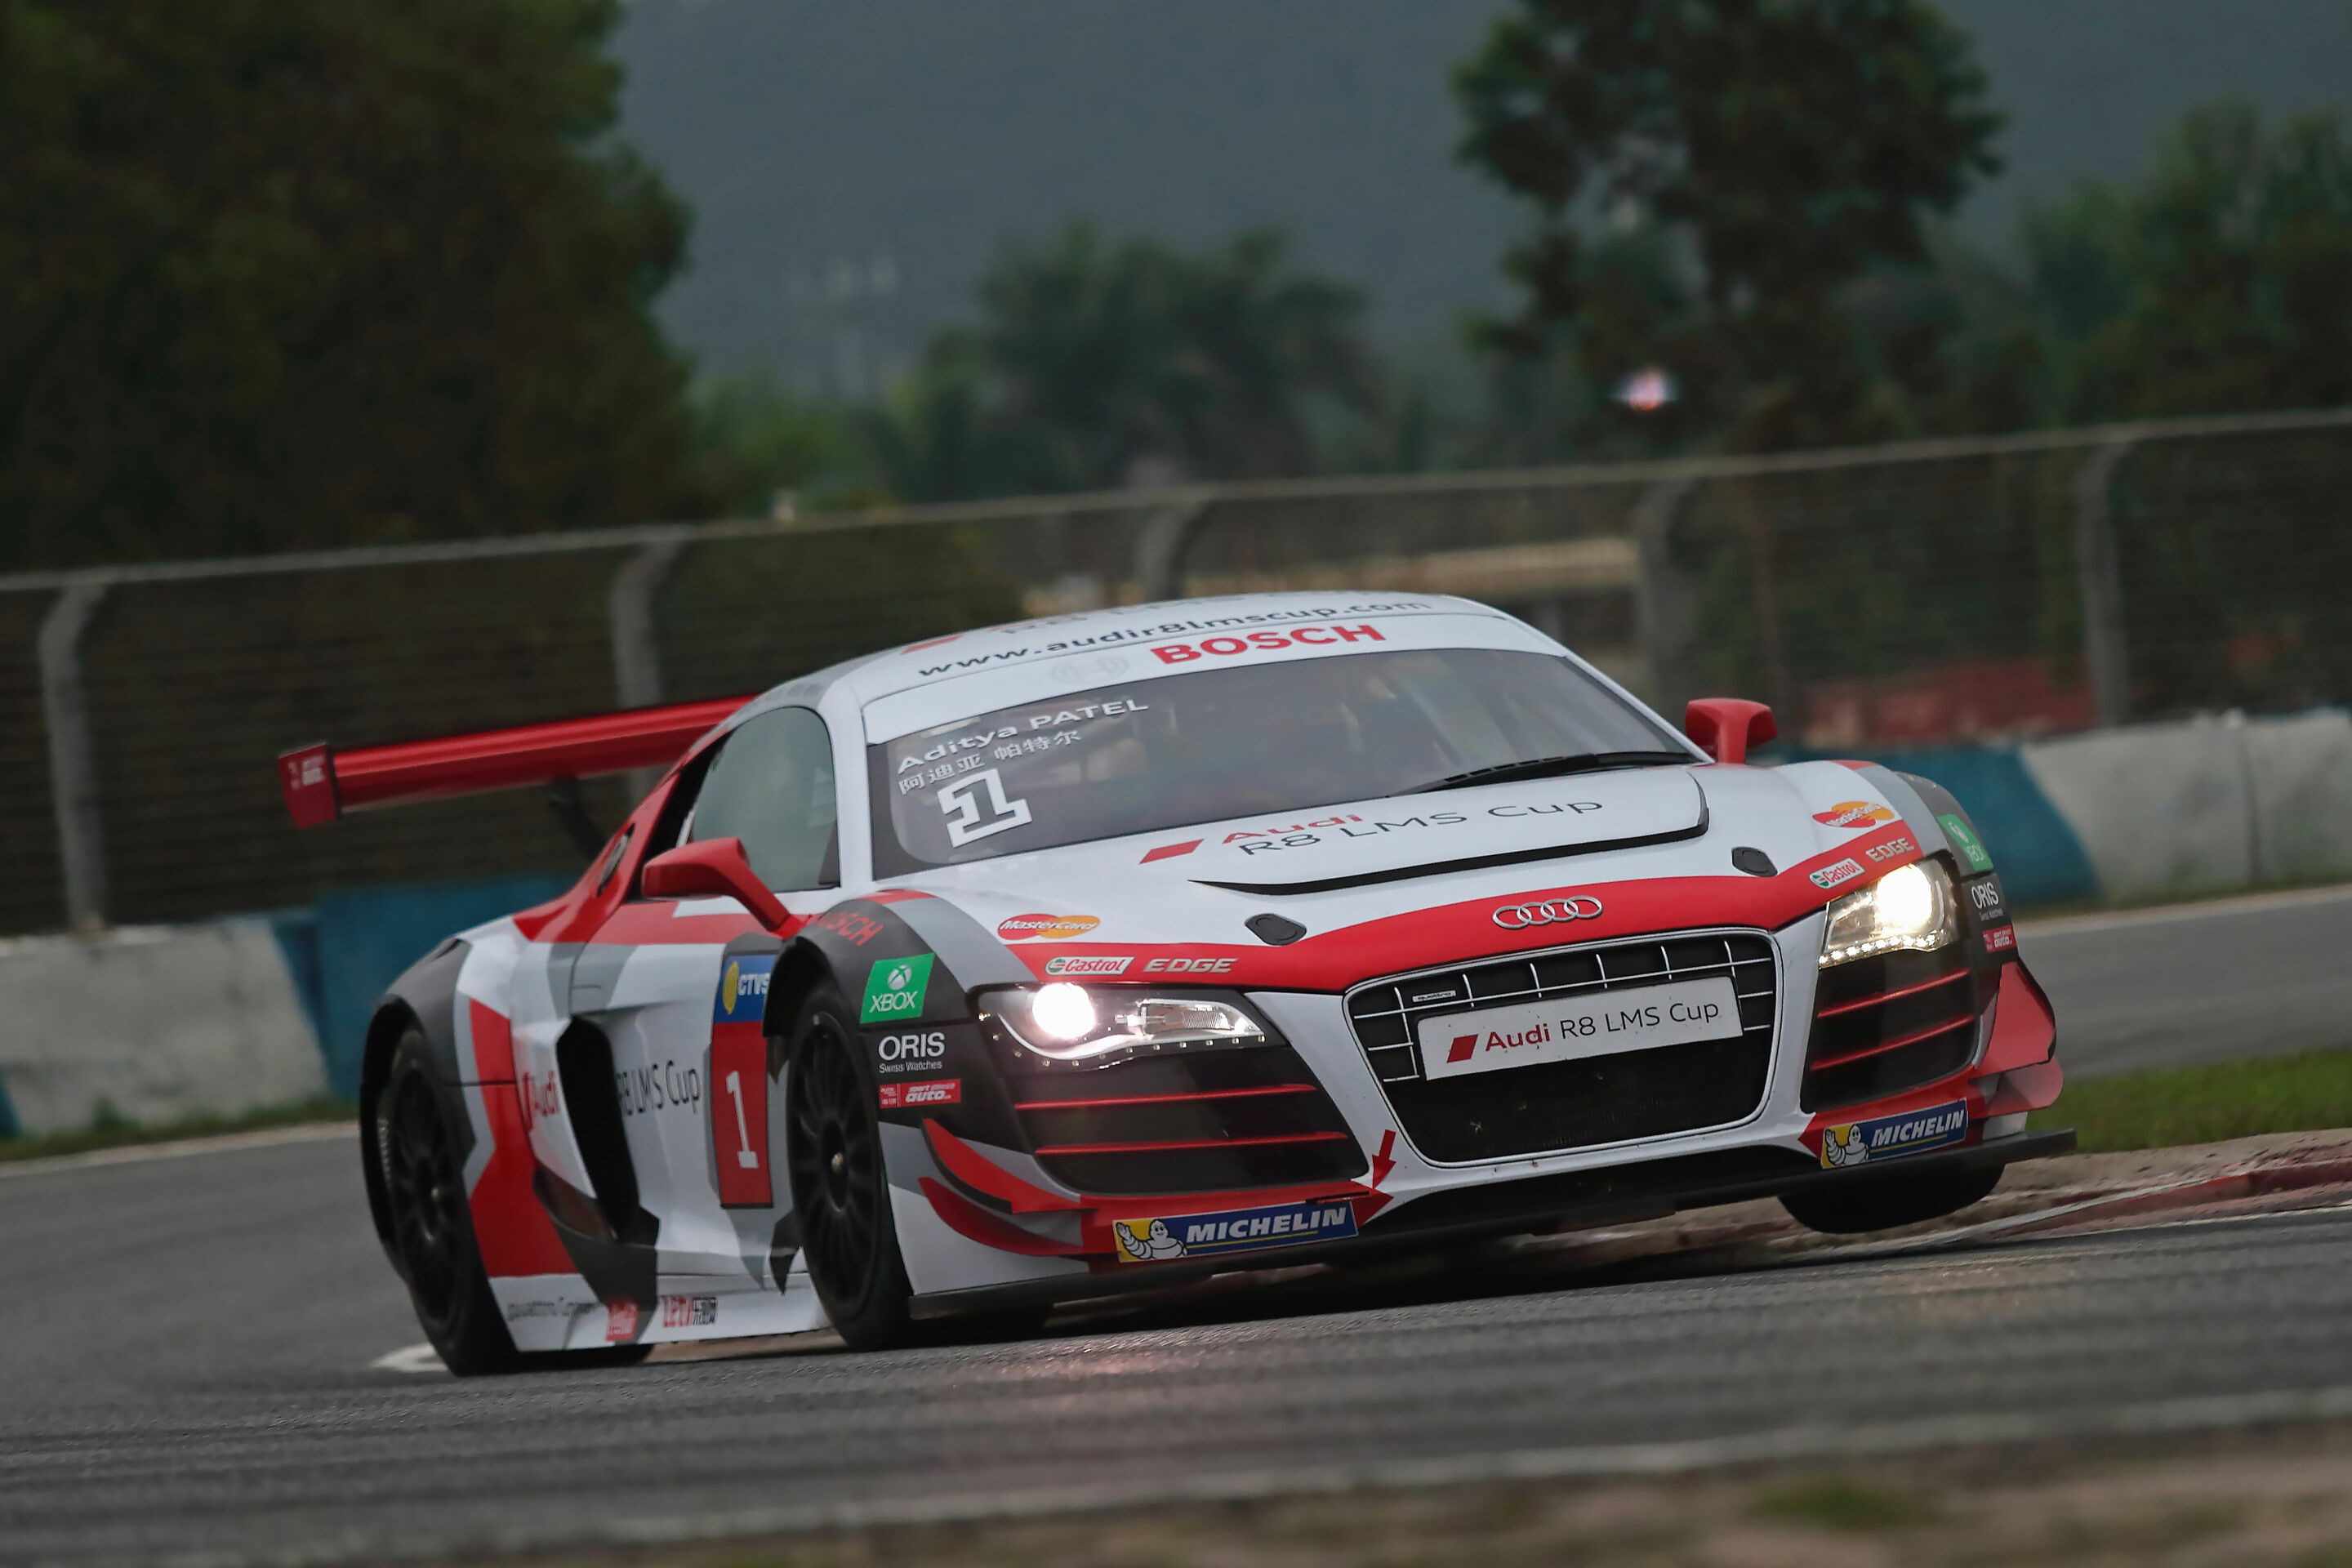 Season opener for Audi racing series in Asia with numerous innovations